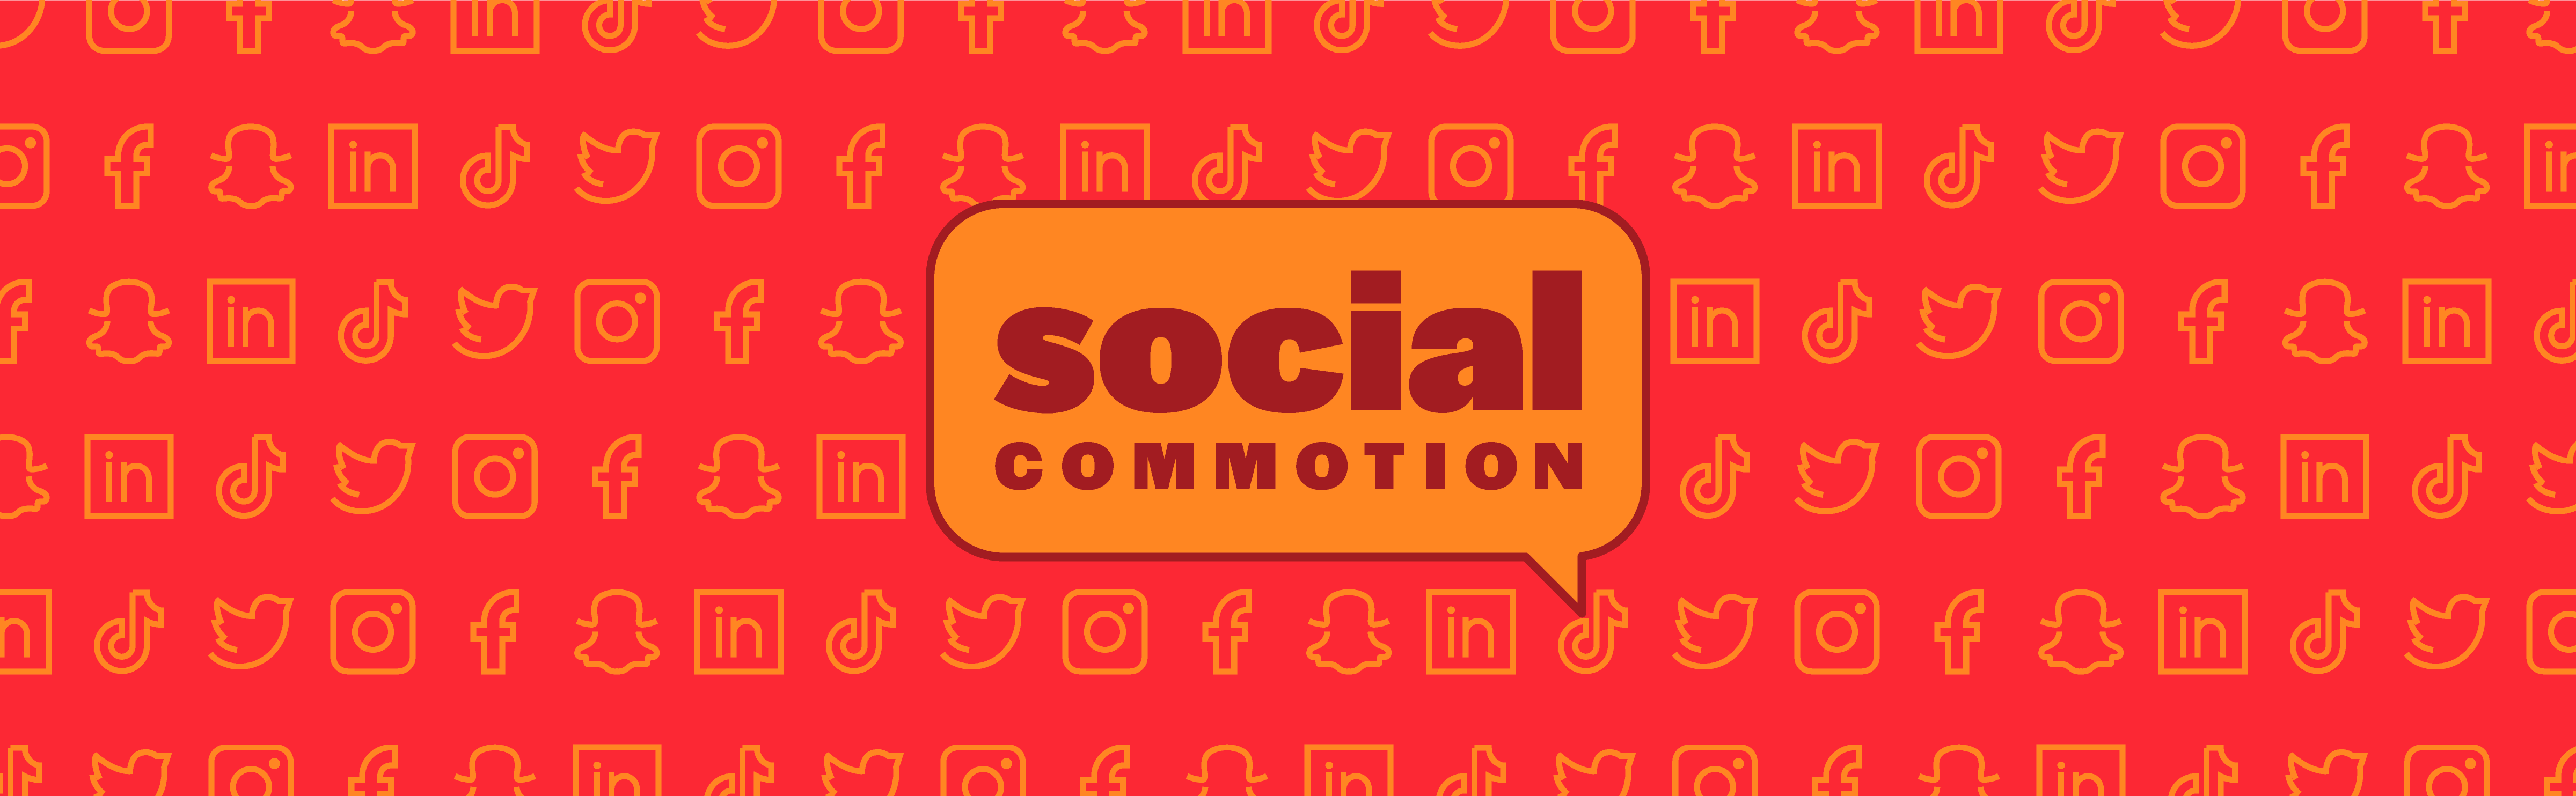 Social Commotion image with social media icons at various sizes